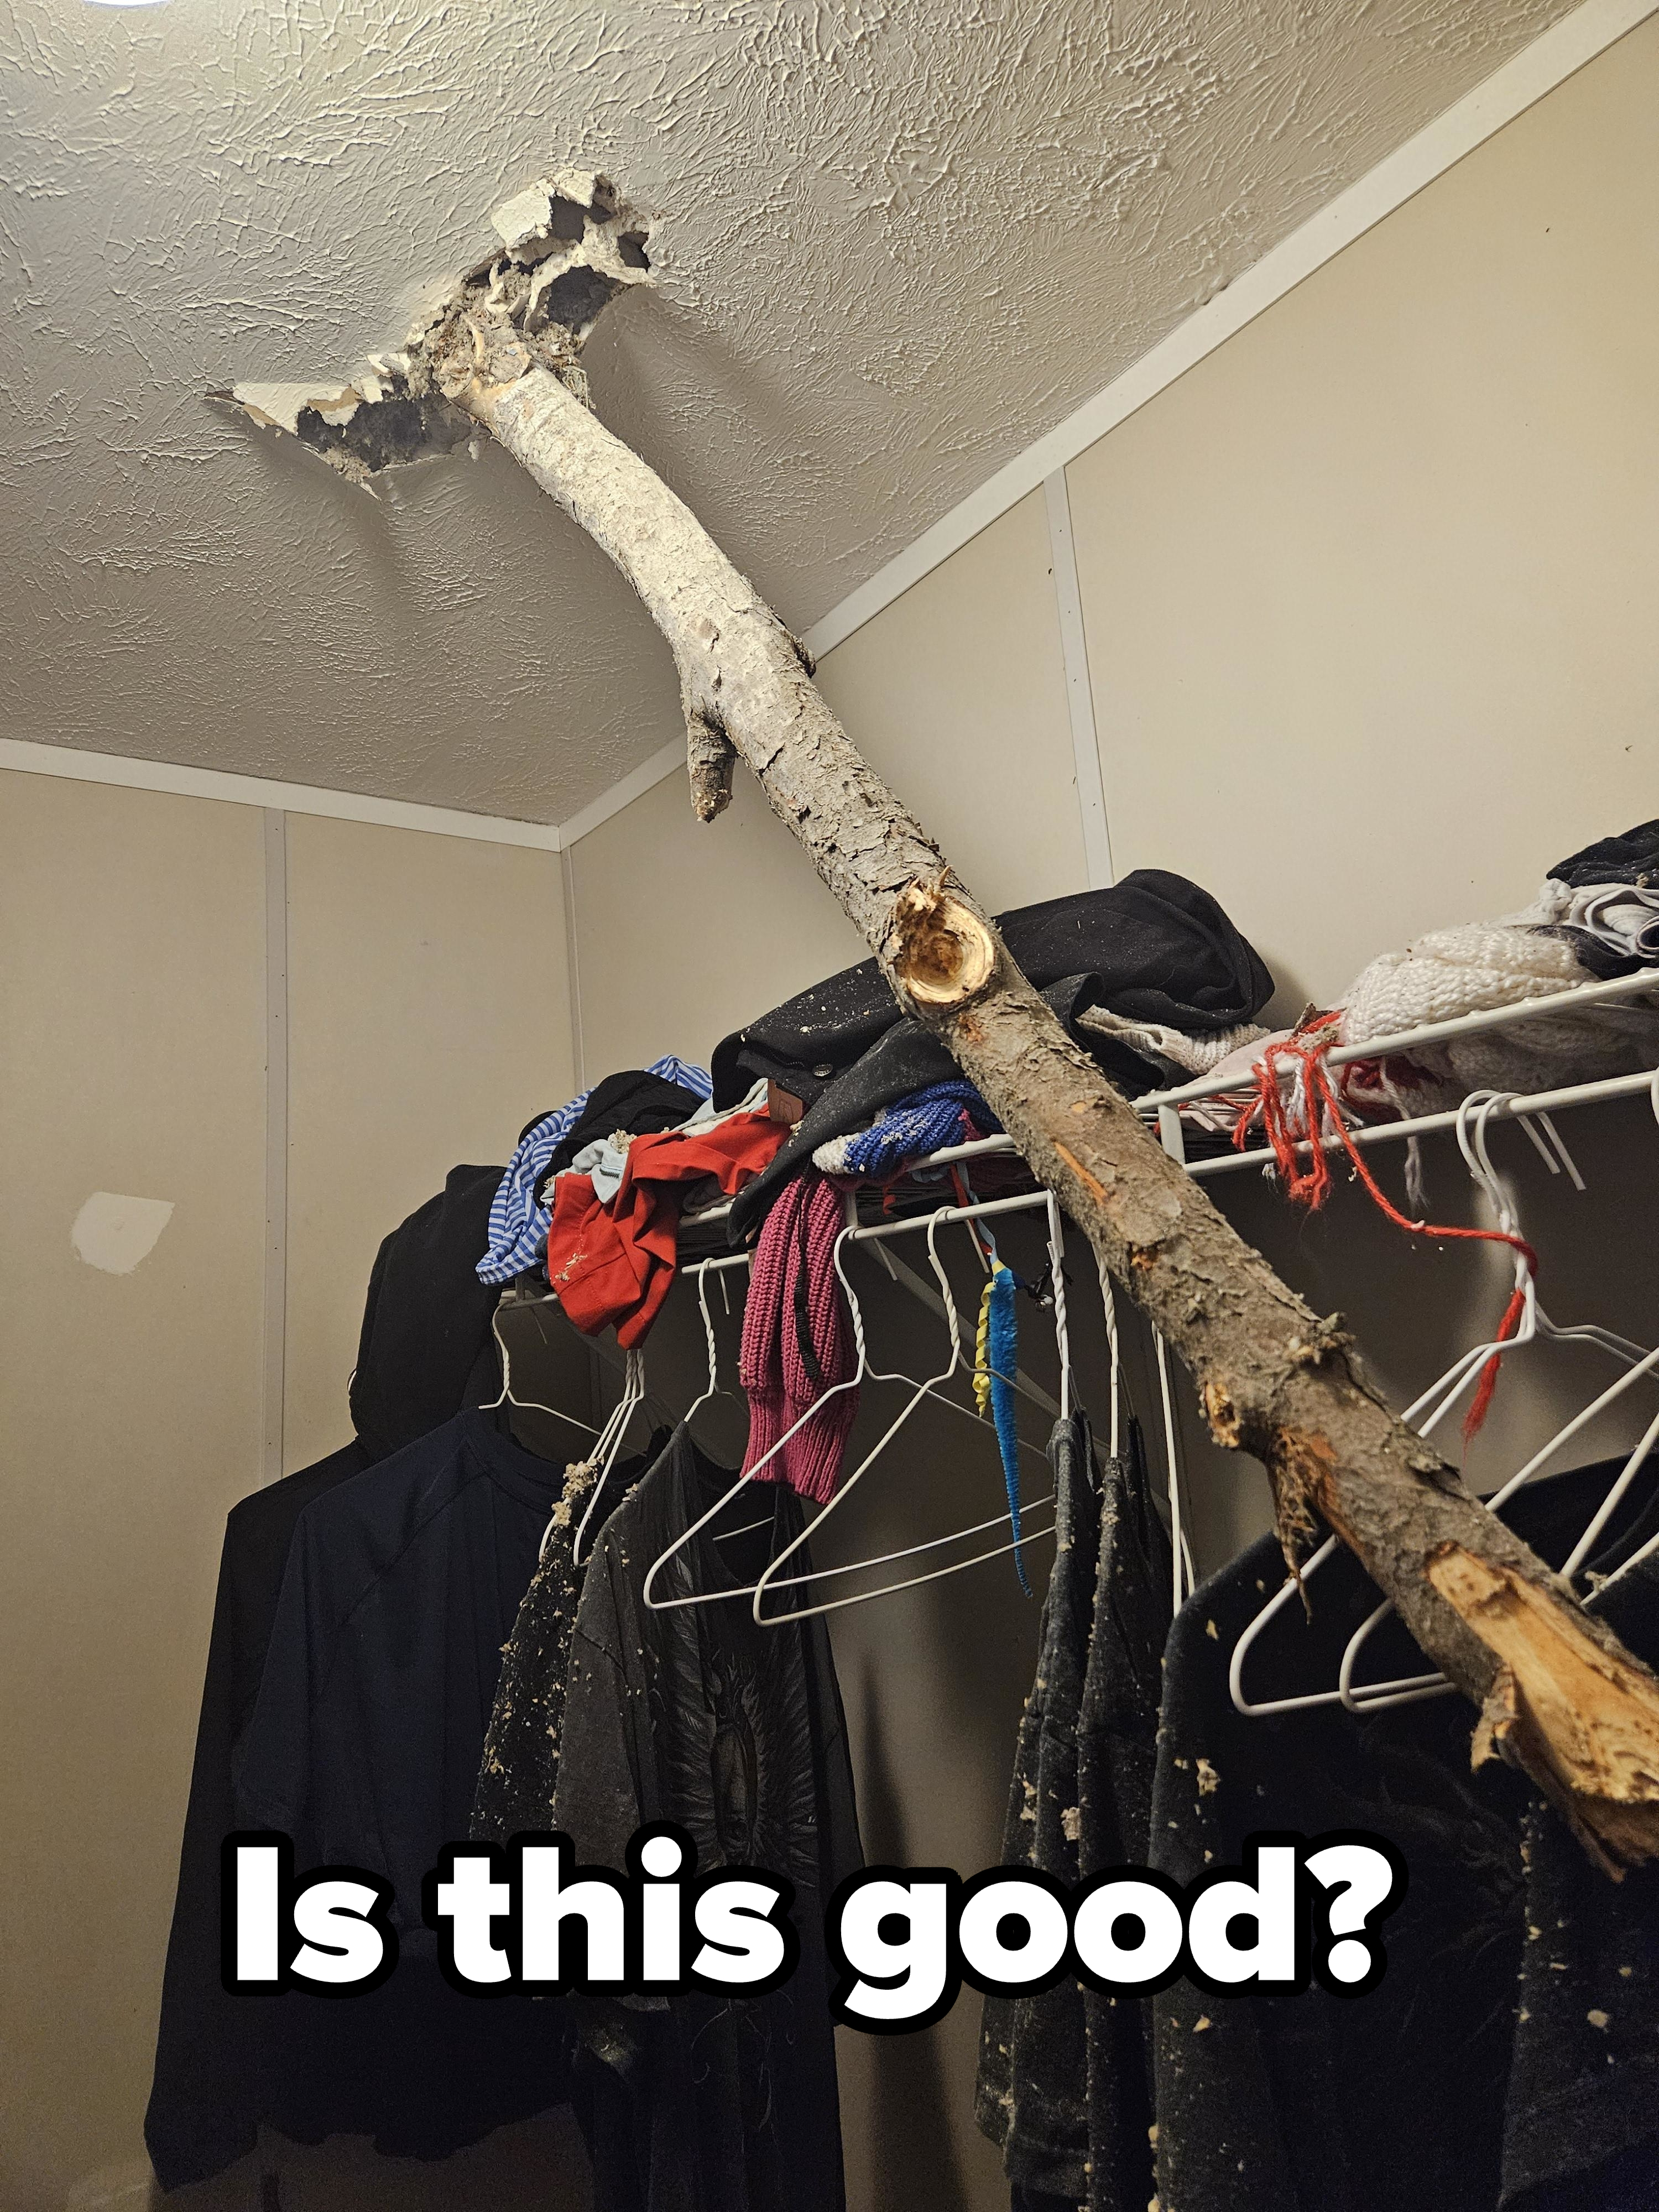 A tree branch has fallen through a ceiling, damaging it and hanging above a cluttered clothes rack